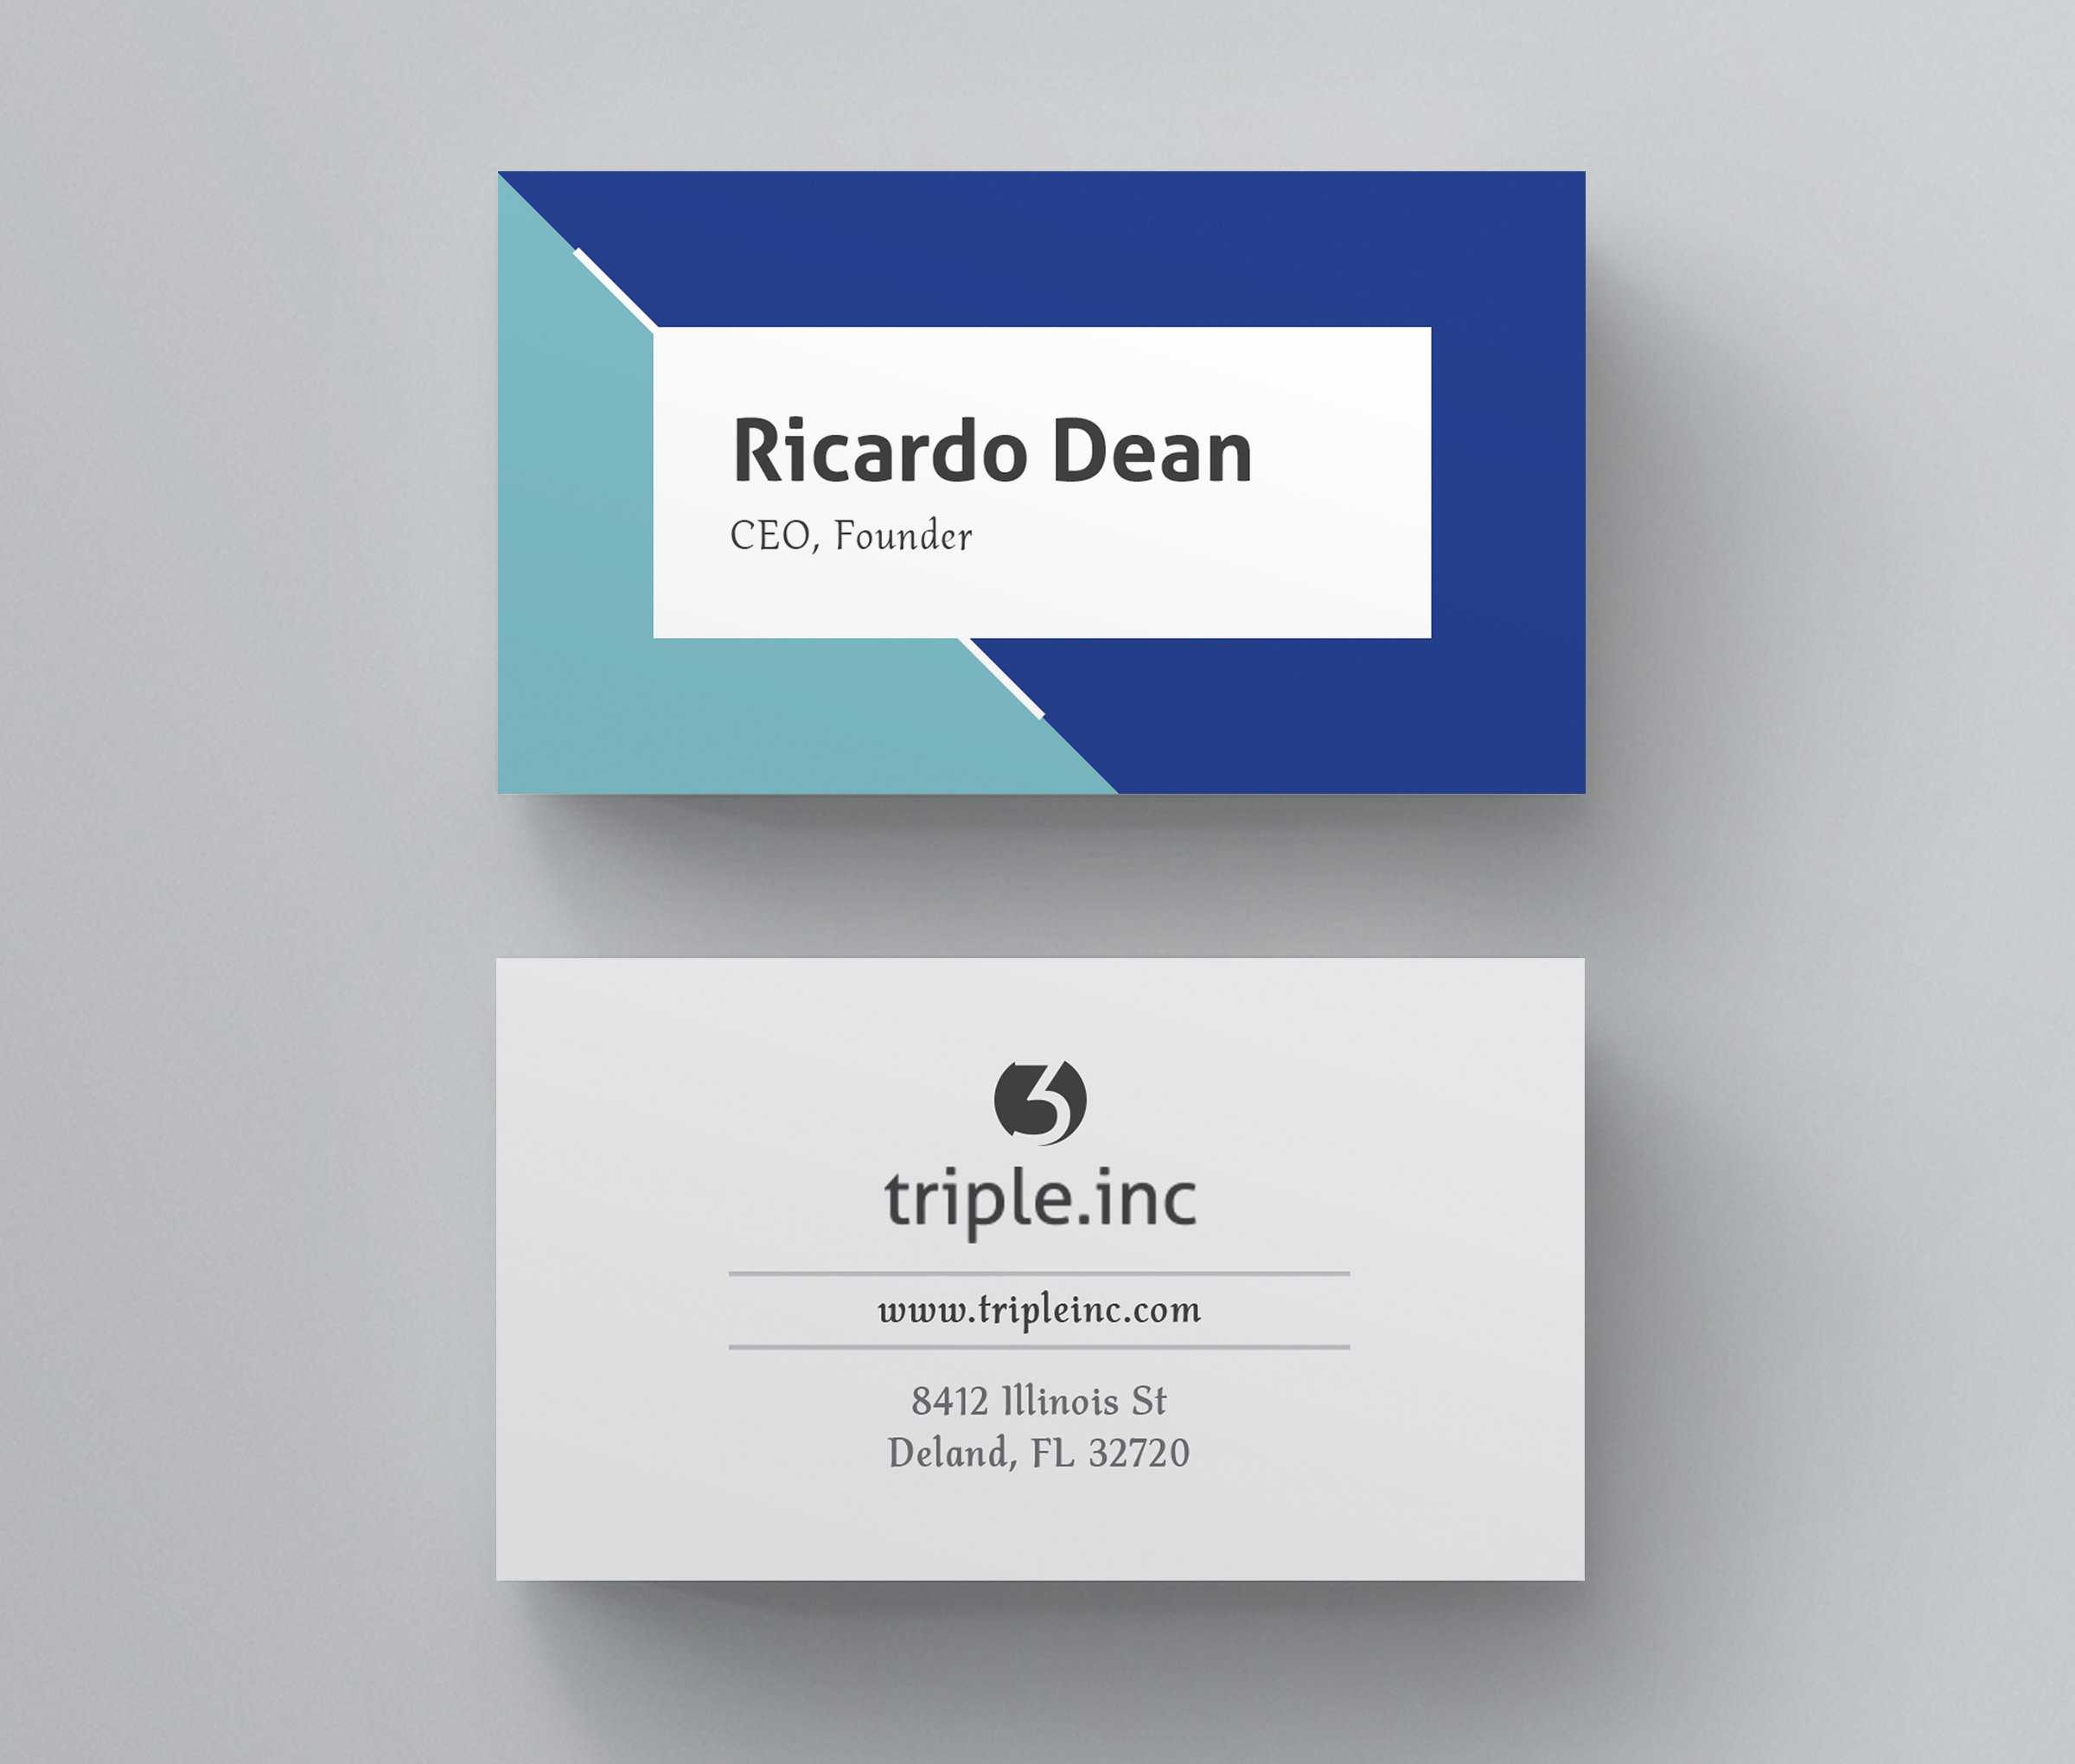 Business Card Template, Business Card Indesign, Ms Word Business Card,  Calling Card, Editable, Instant Download, Affordable Business Card Throughout Template For Calling Card